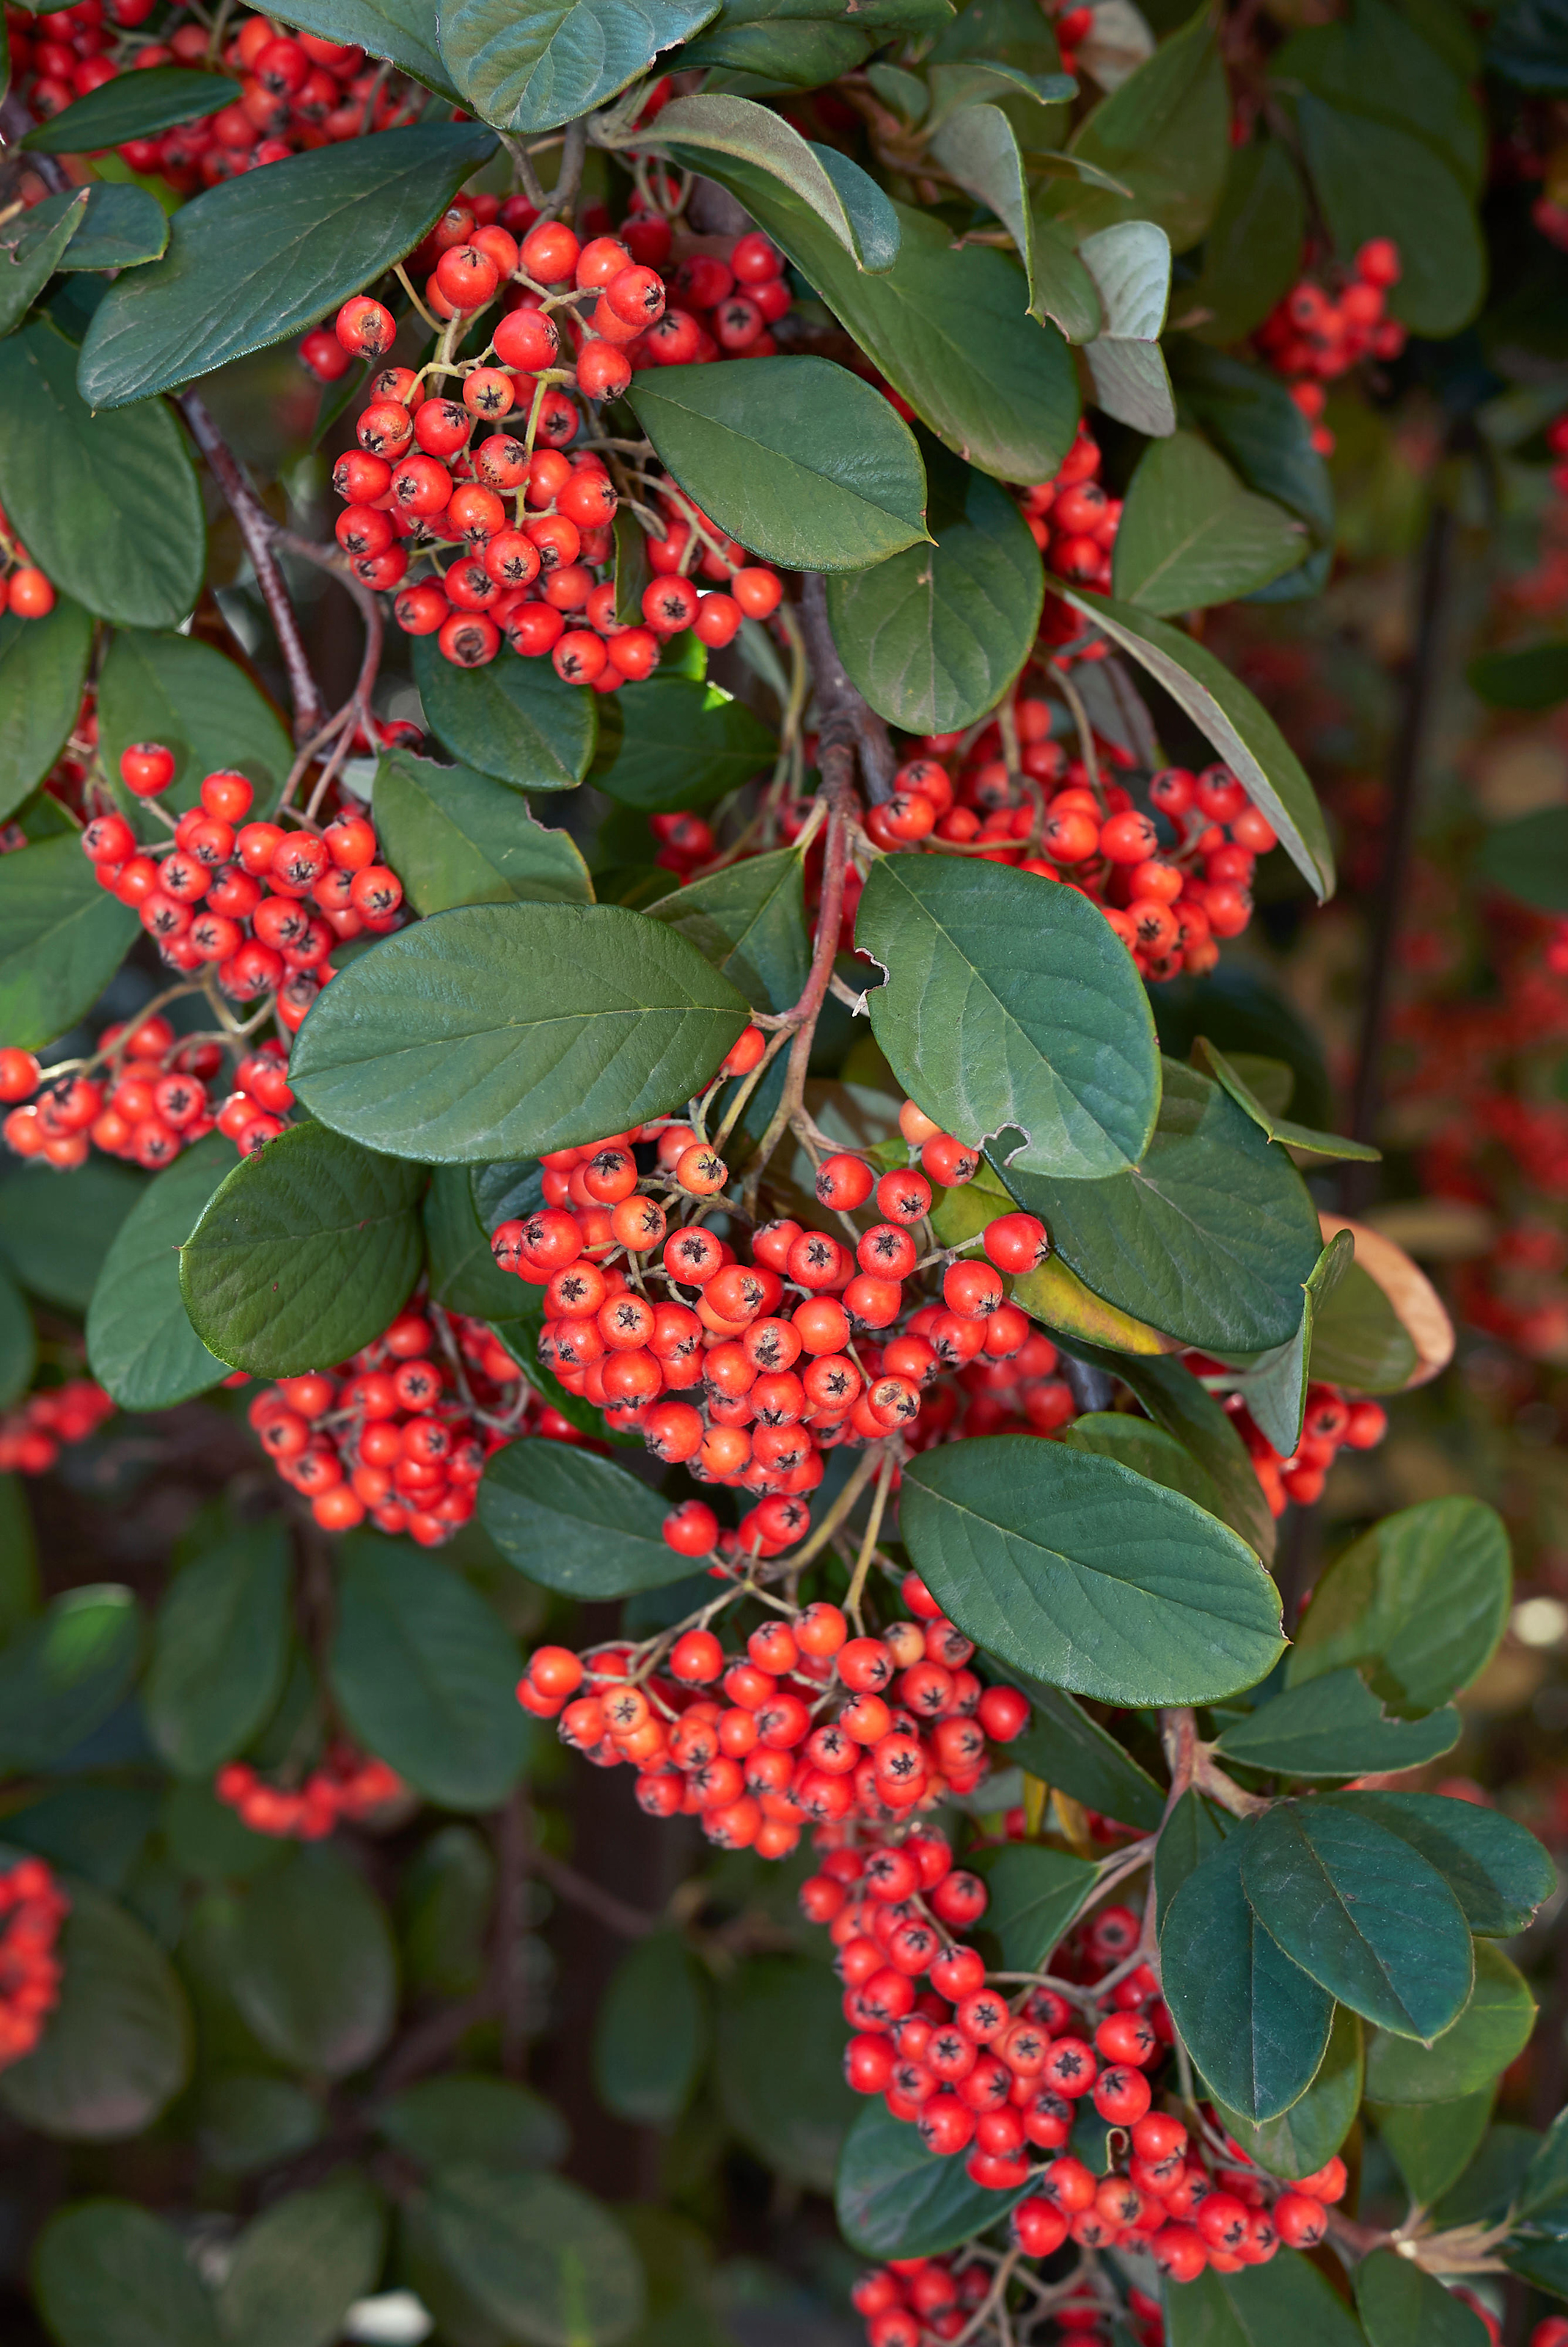 Cotoneaster lacteus covered in red berries (Alamy/PA)